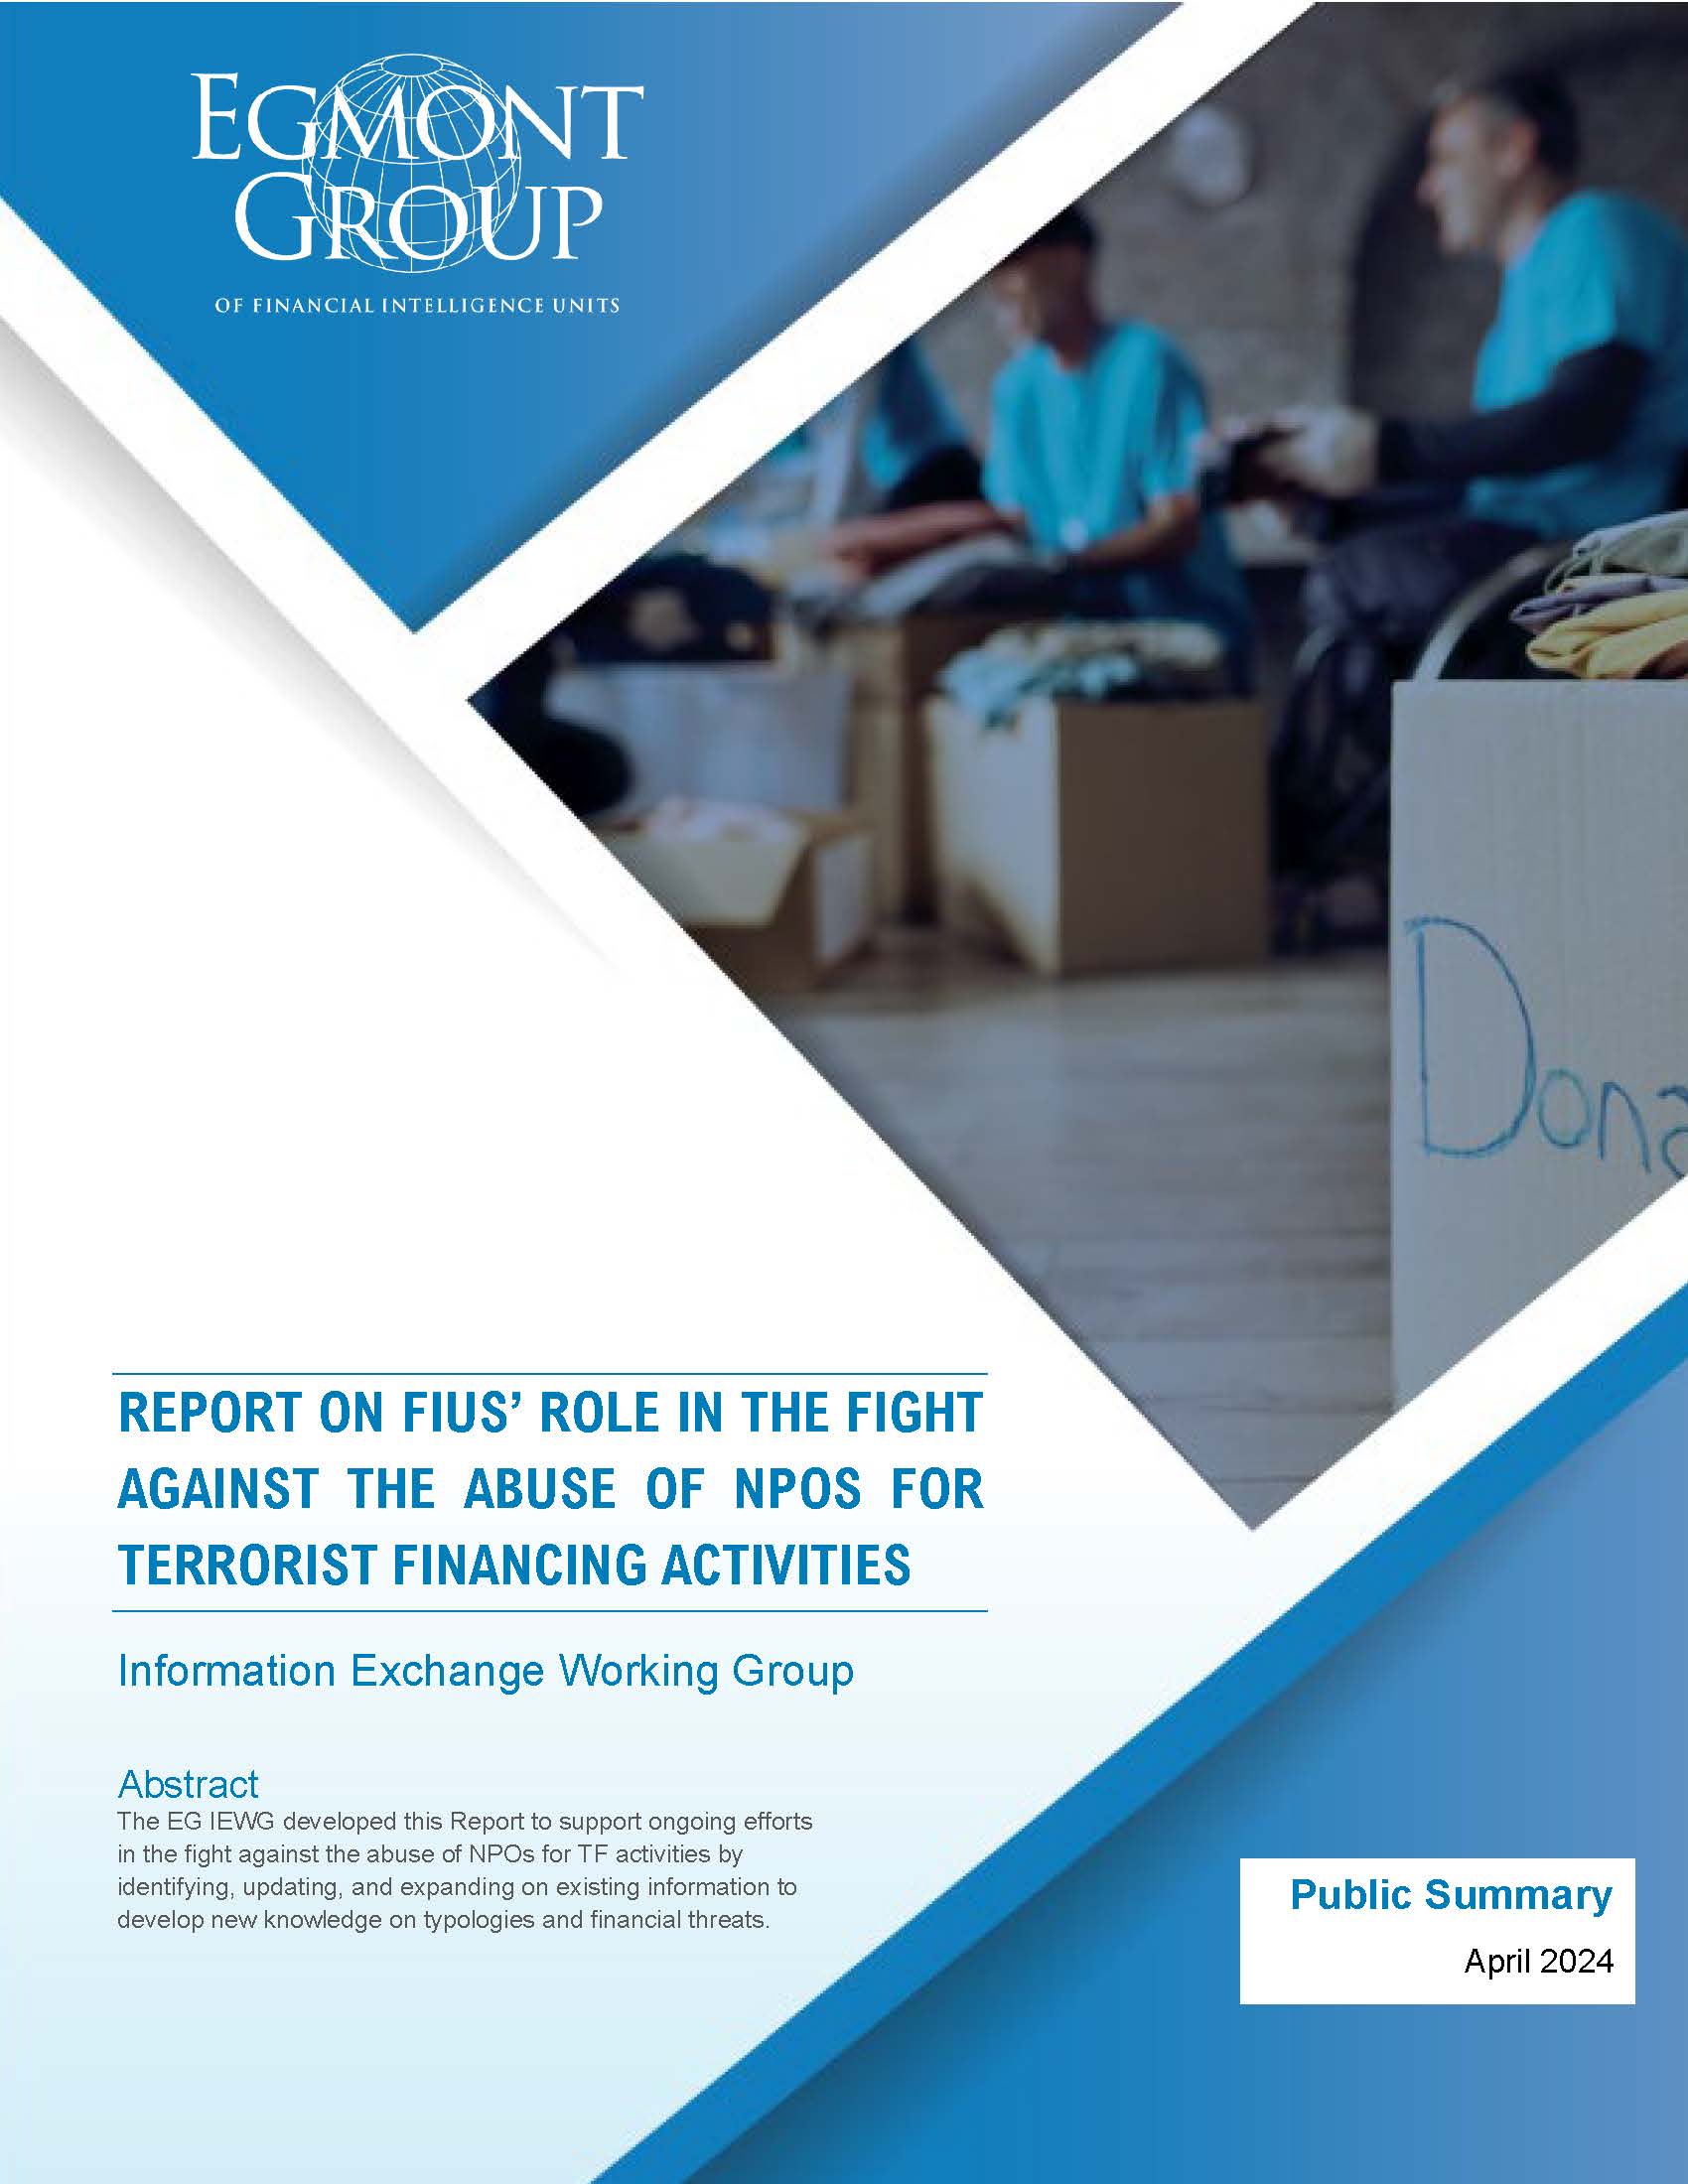 Report on FIUs’ Role in the Fight Against the Abuse of NPOs for Terrorist Financing Activities